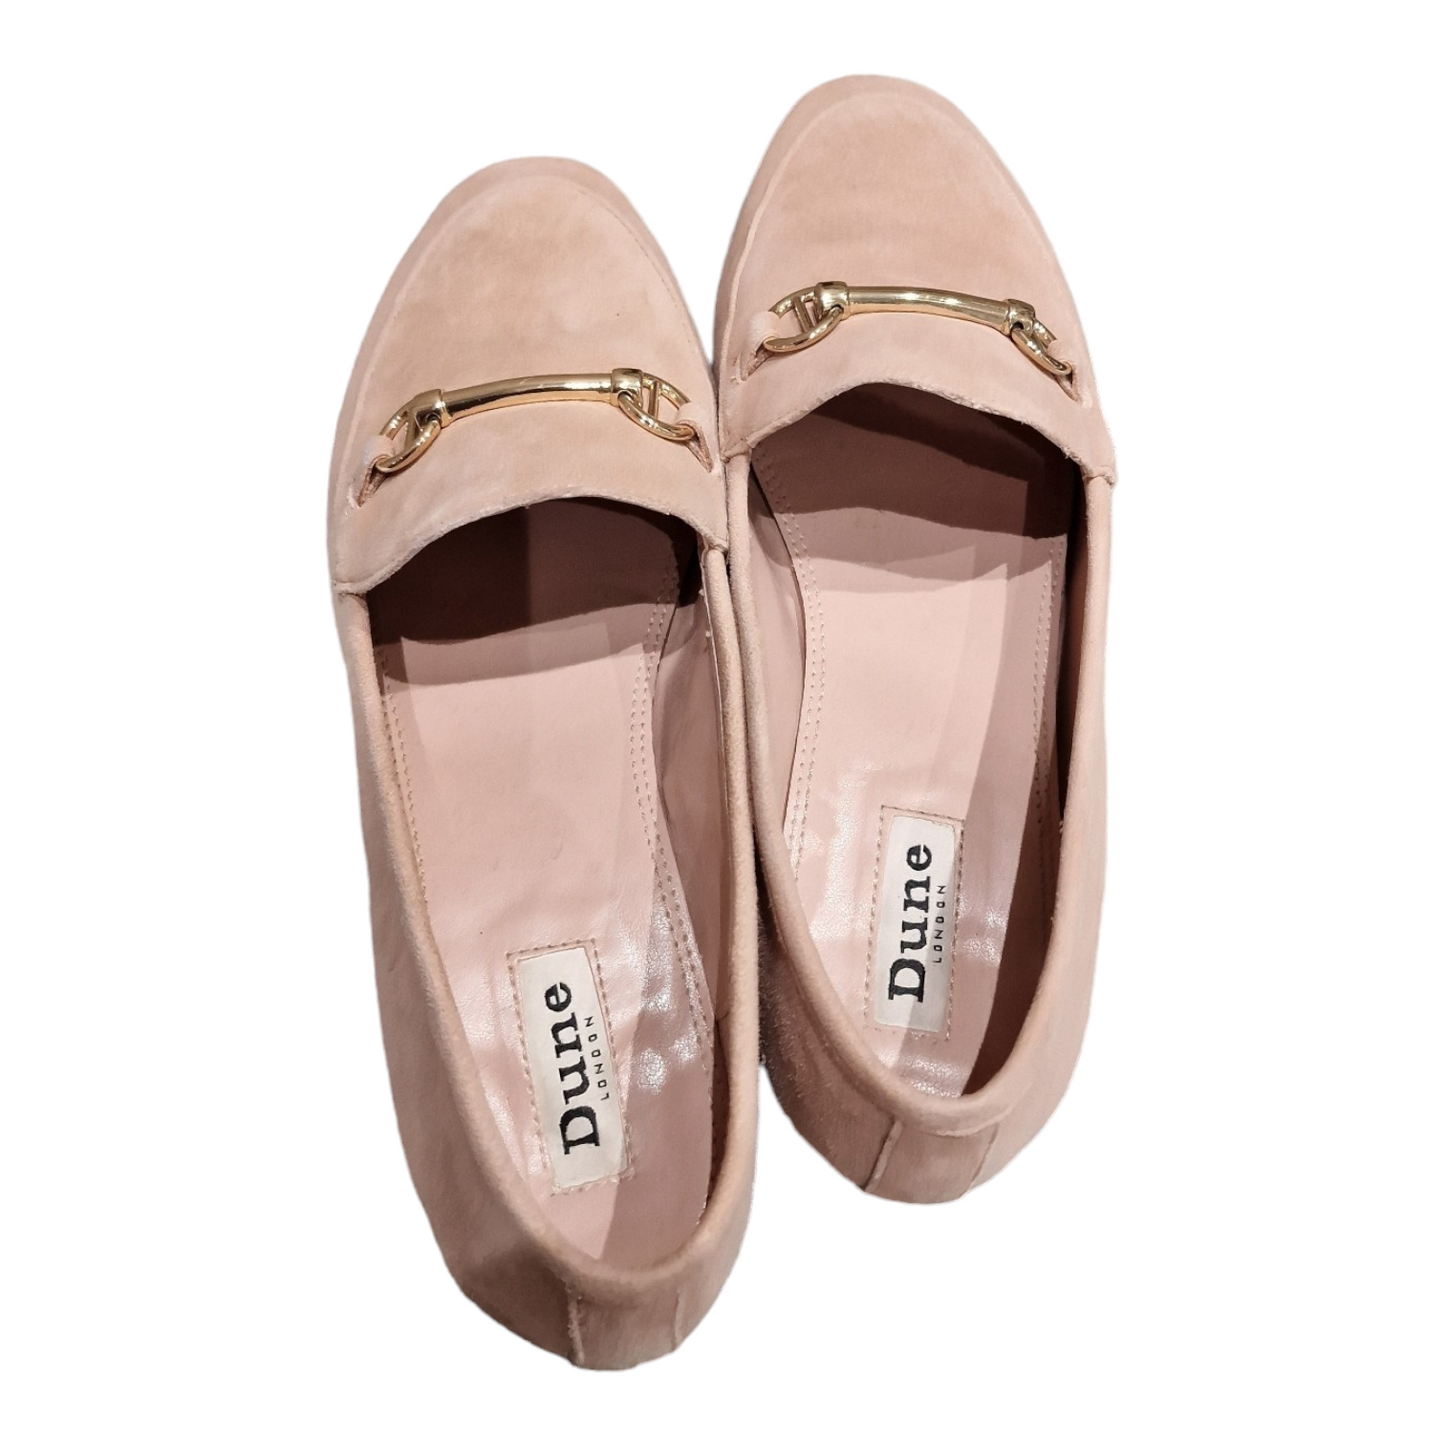 Dune Blush Suede Shoes, size 5